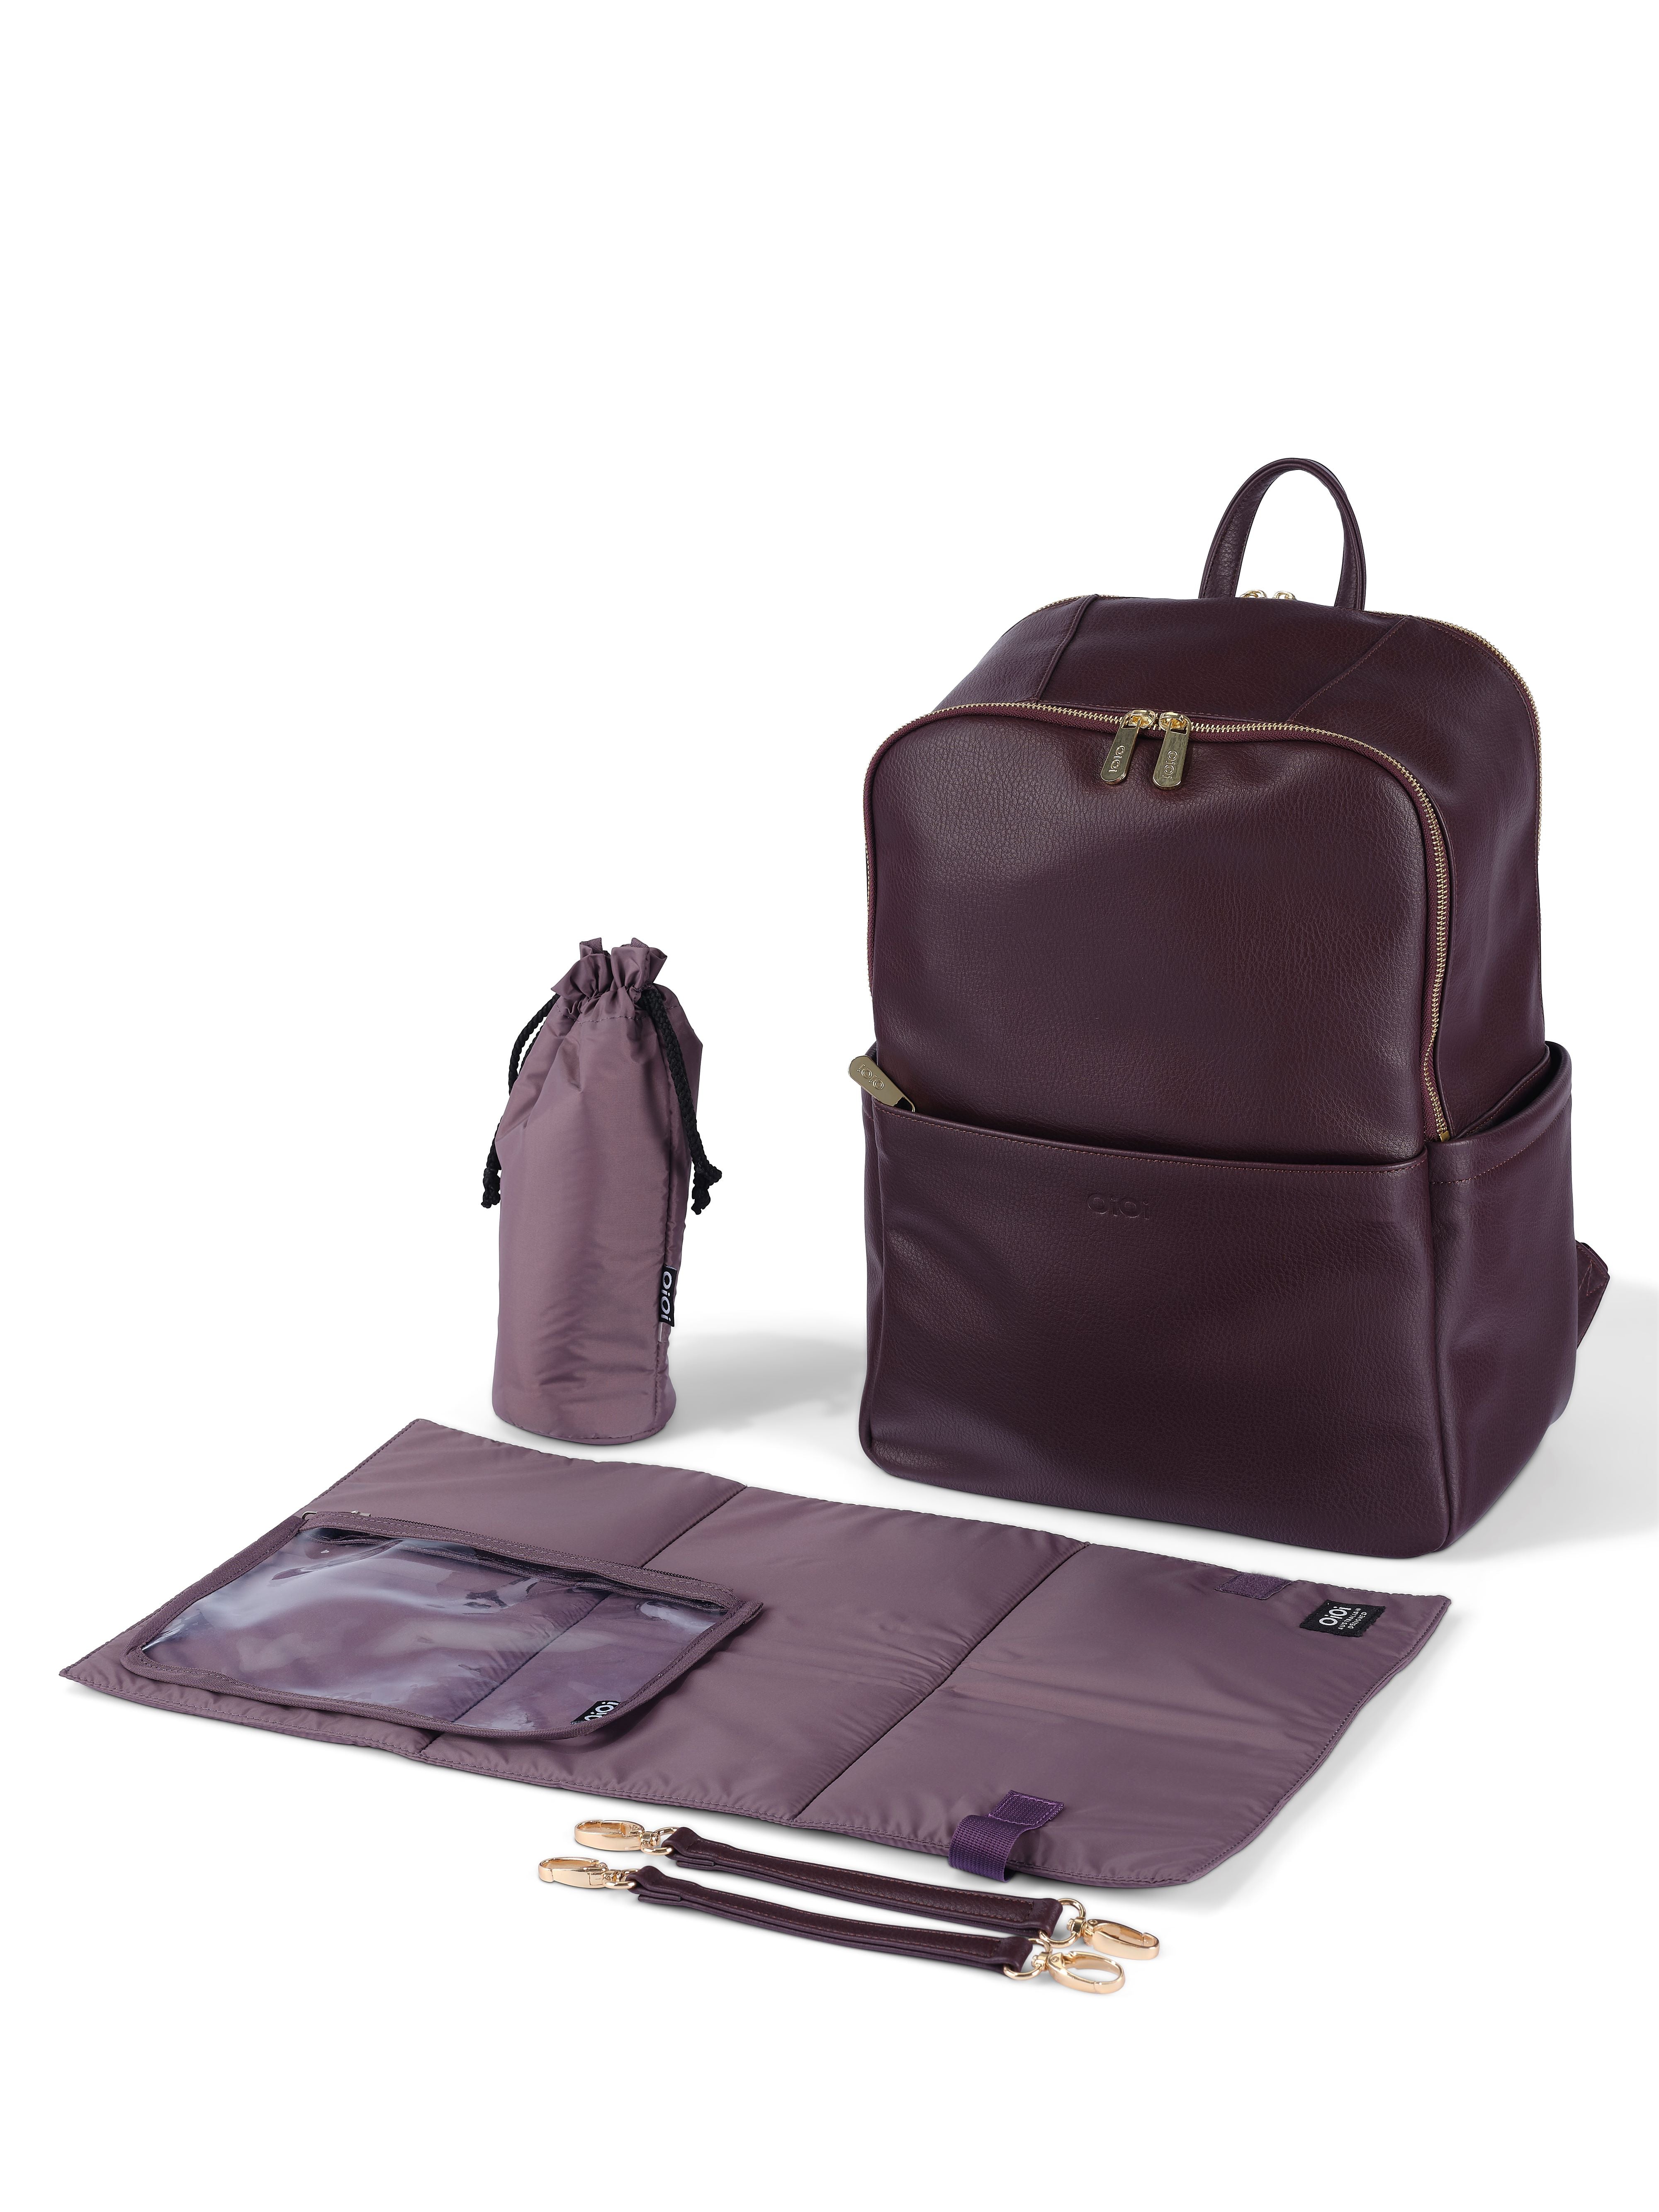 OiOi Multitasker Nappy Backpack Mulberry Faux Leather